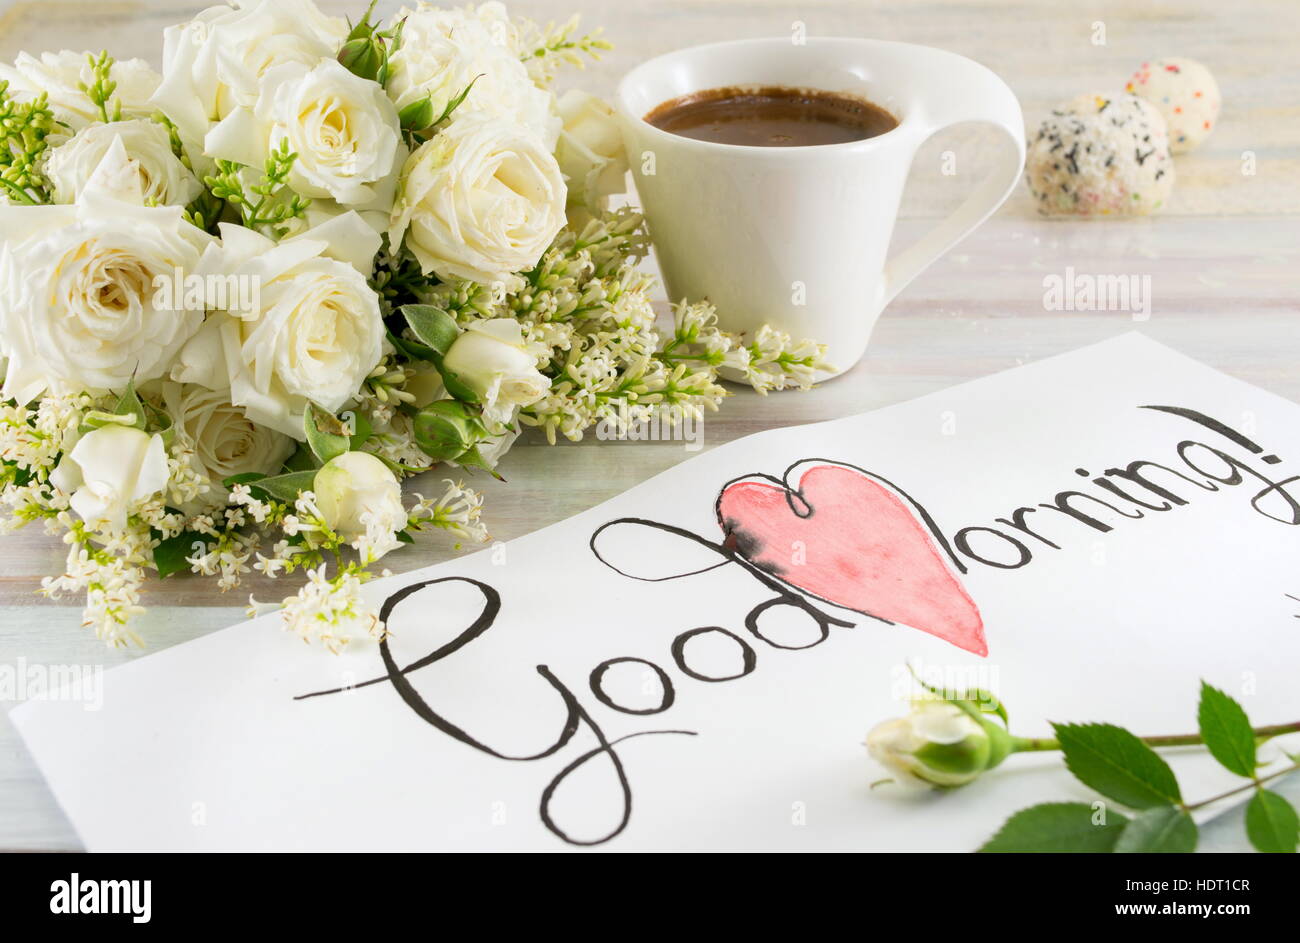 white roses, coffee and good morning note on a table Stock Photo